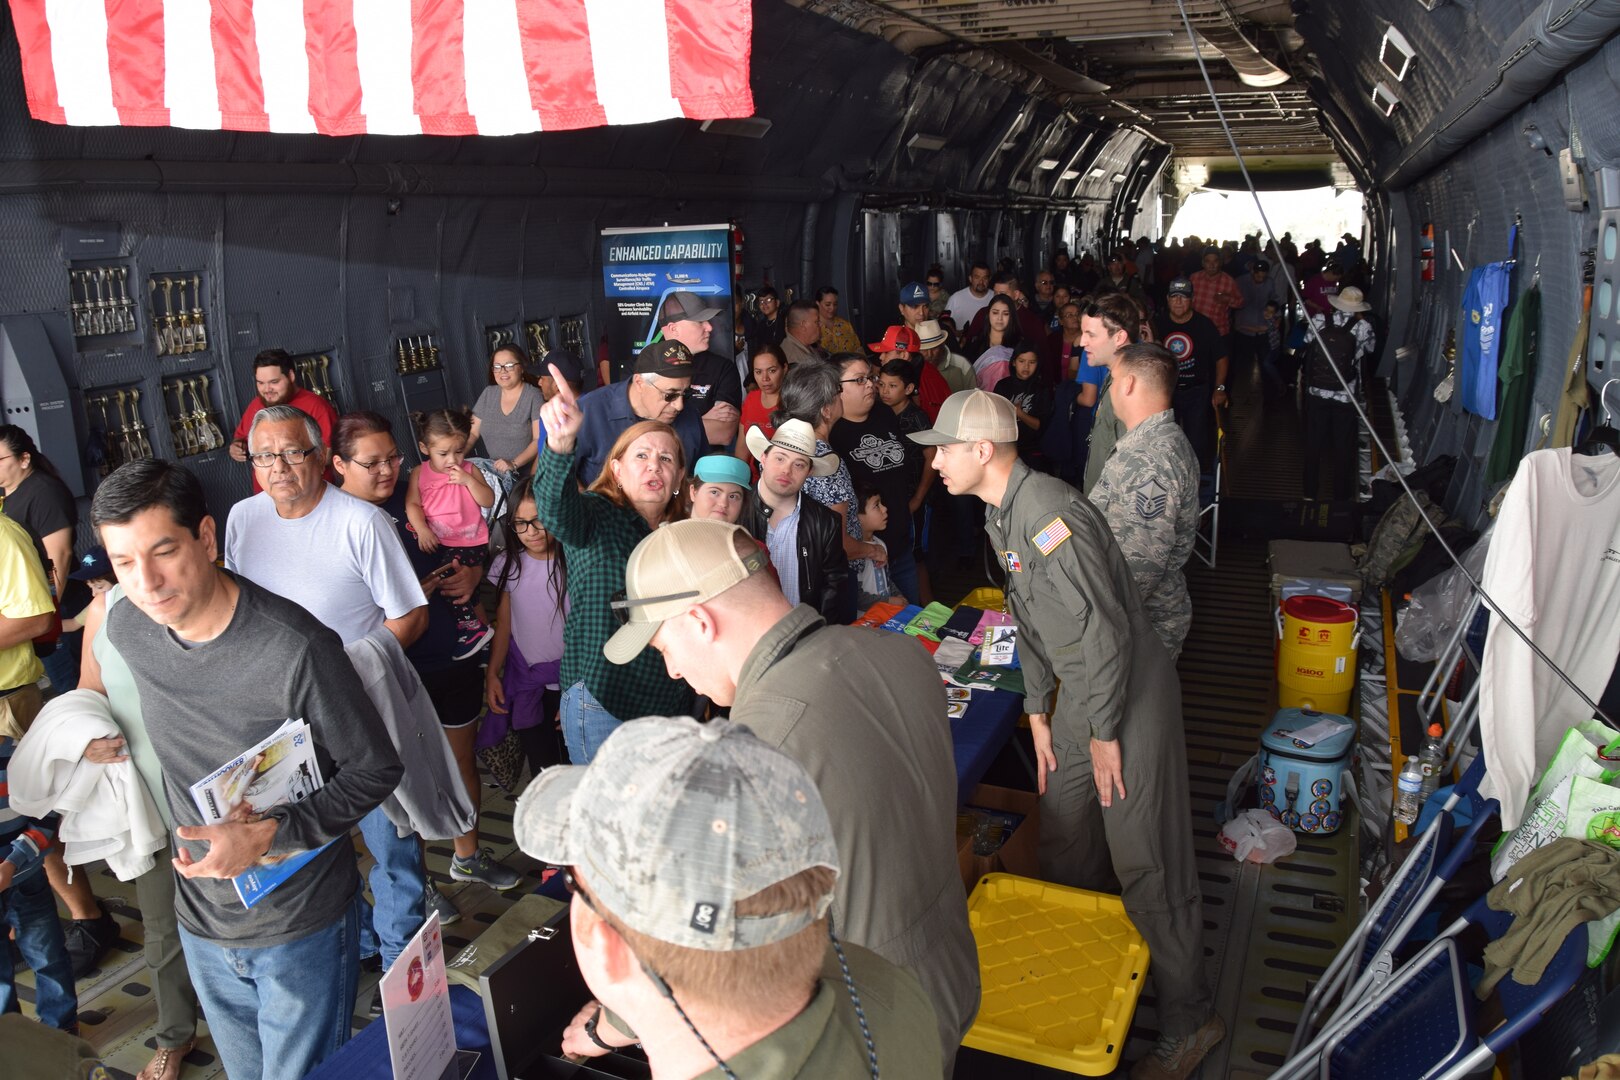 A 433rd Airlift Wing C-5M Super Galaxy was one of the aircraft in attendance Feb. 16, 2020 at the Stars and Stripes Air Show in Laredo, Texas. Hundreds of people got a chance to walk through the C-5M to view the aircraft up close from the inside. (U.S. Air Force photo by Tech. Sgt. Iram Carmona)